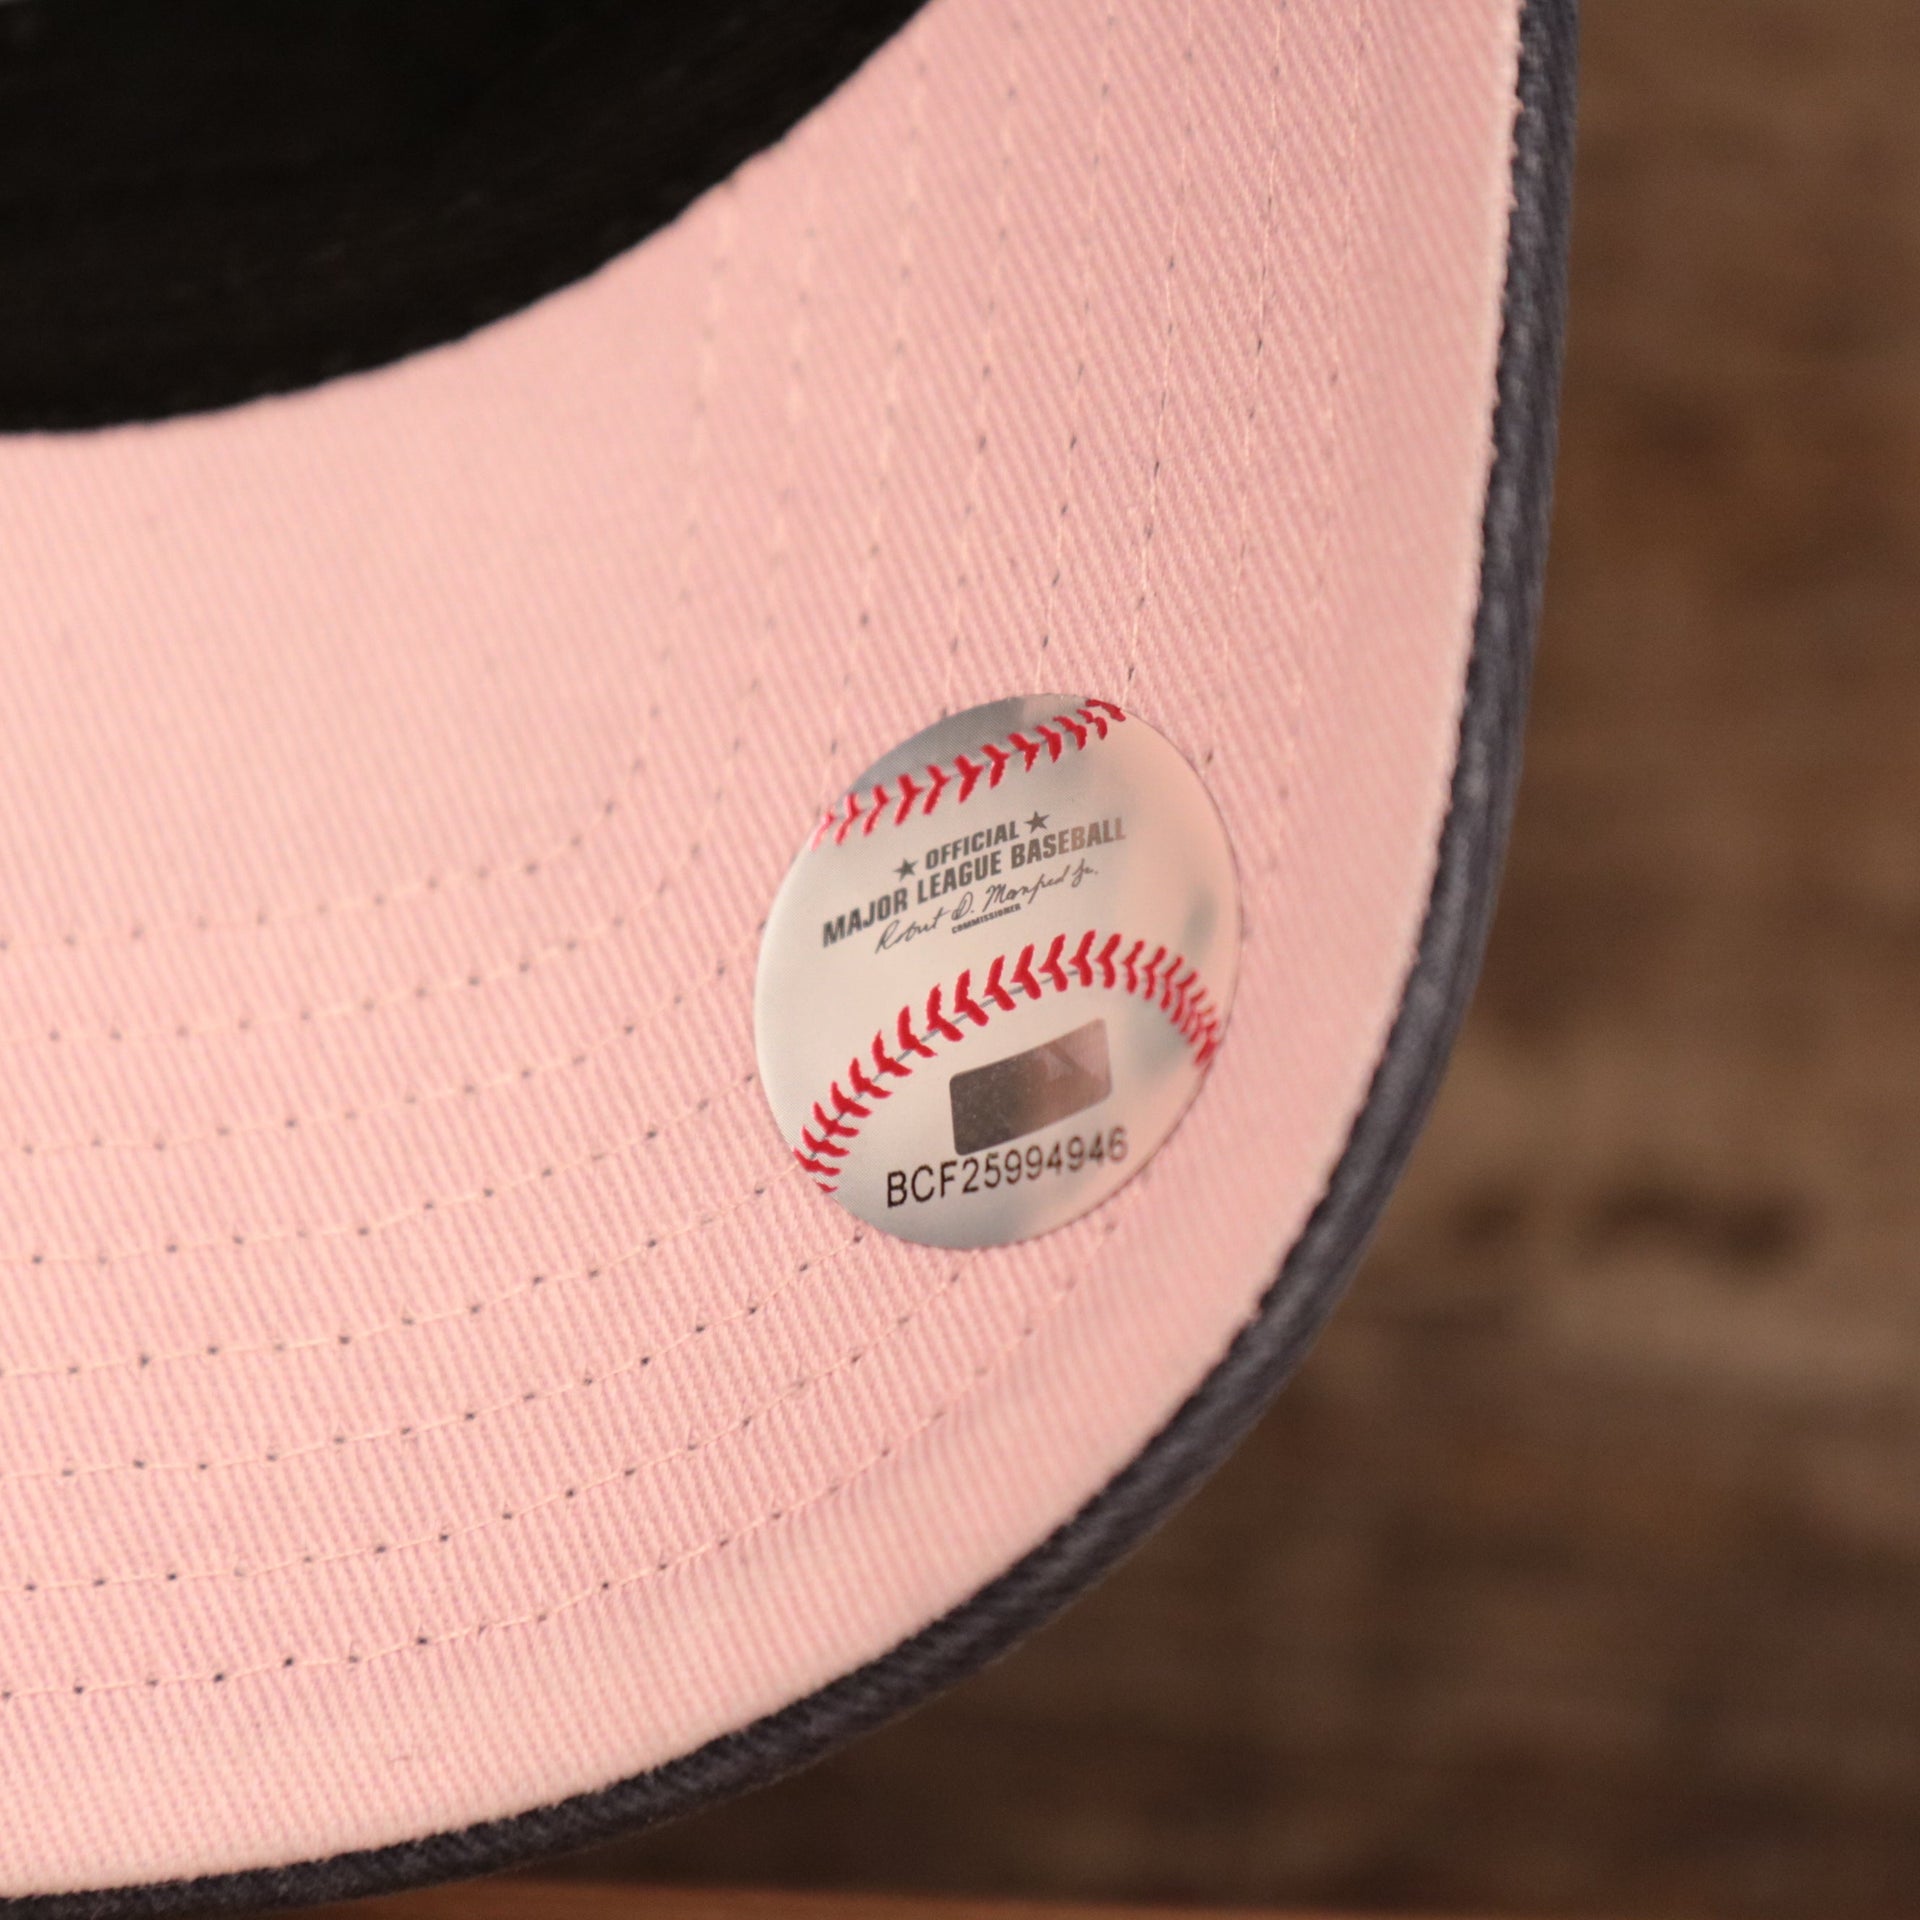 The Official Major League Baseball tag on the Yankees pink bottom dad hat.